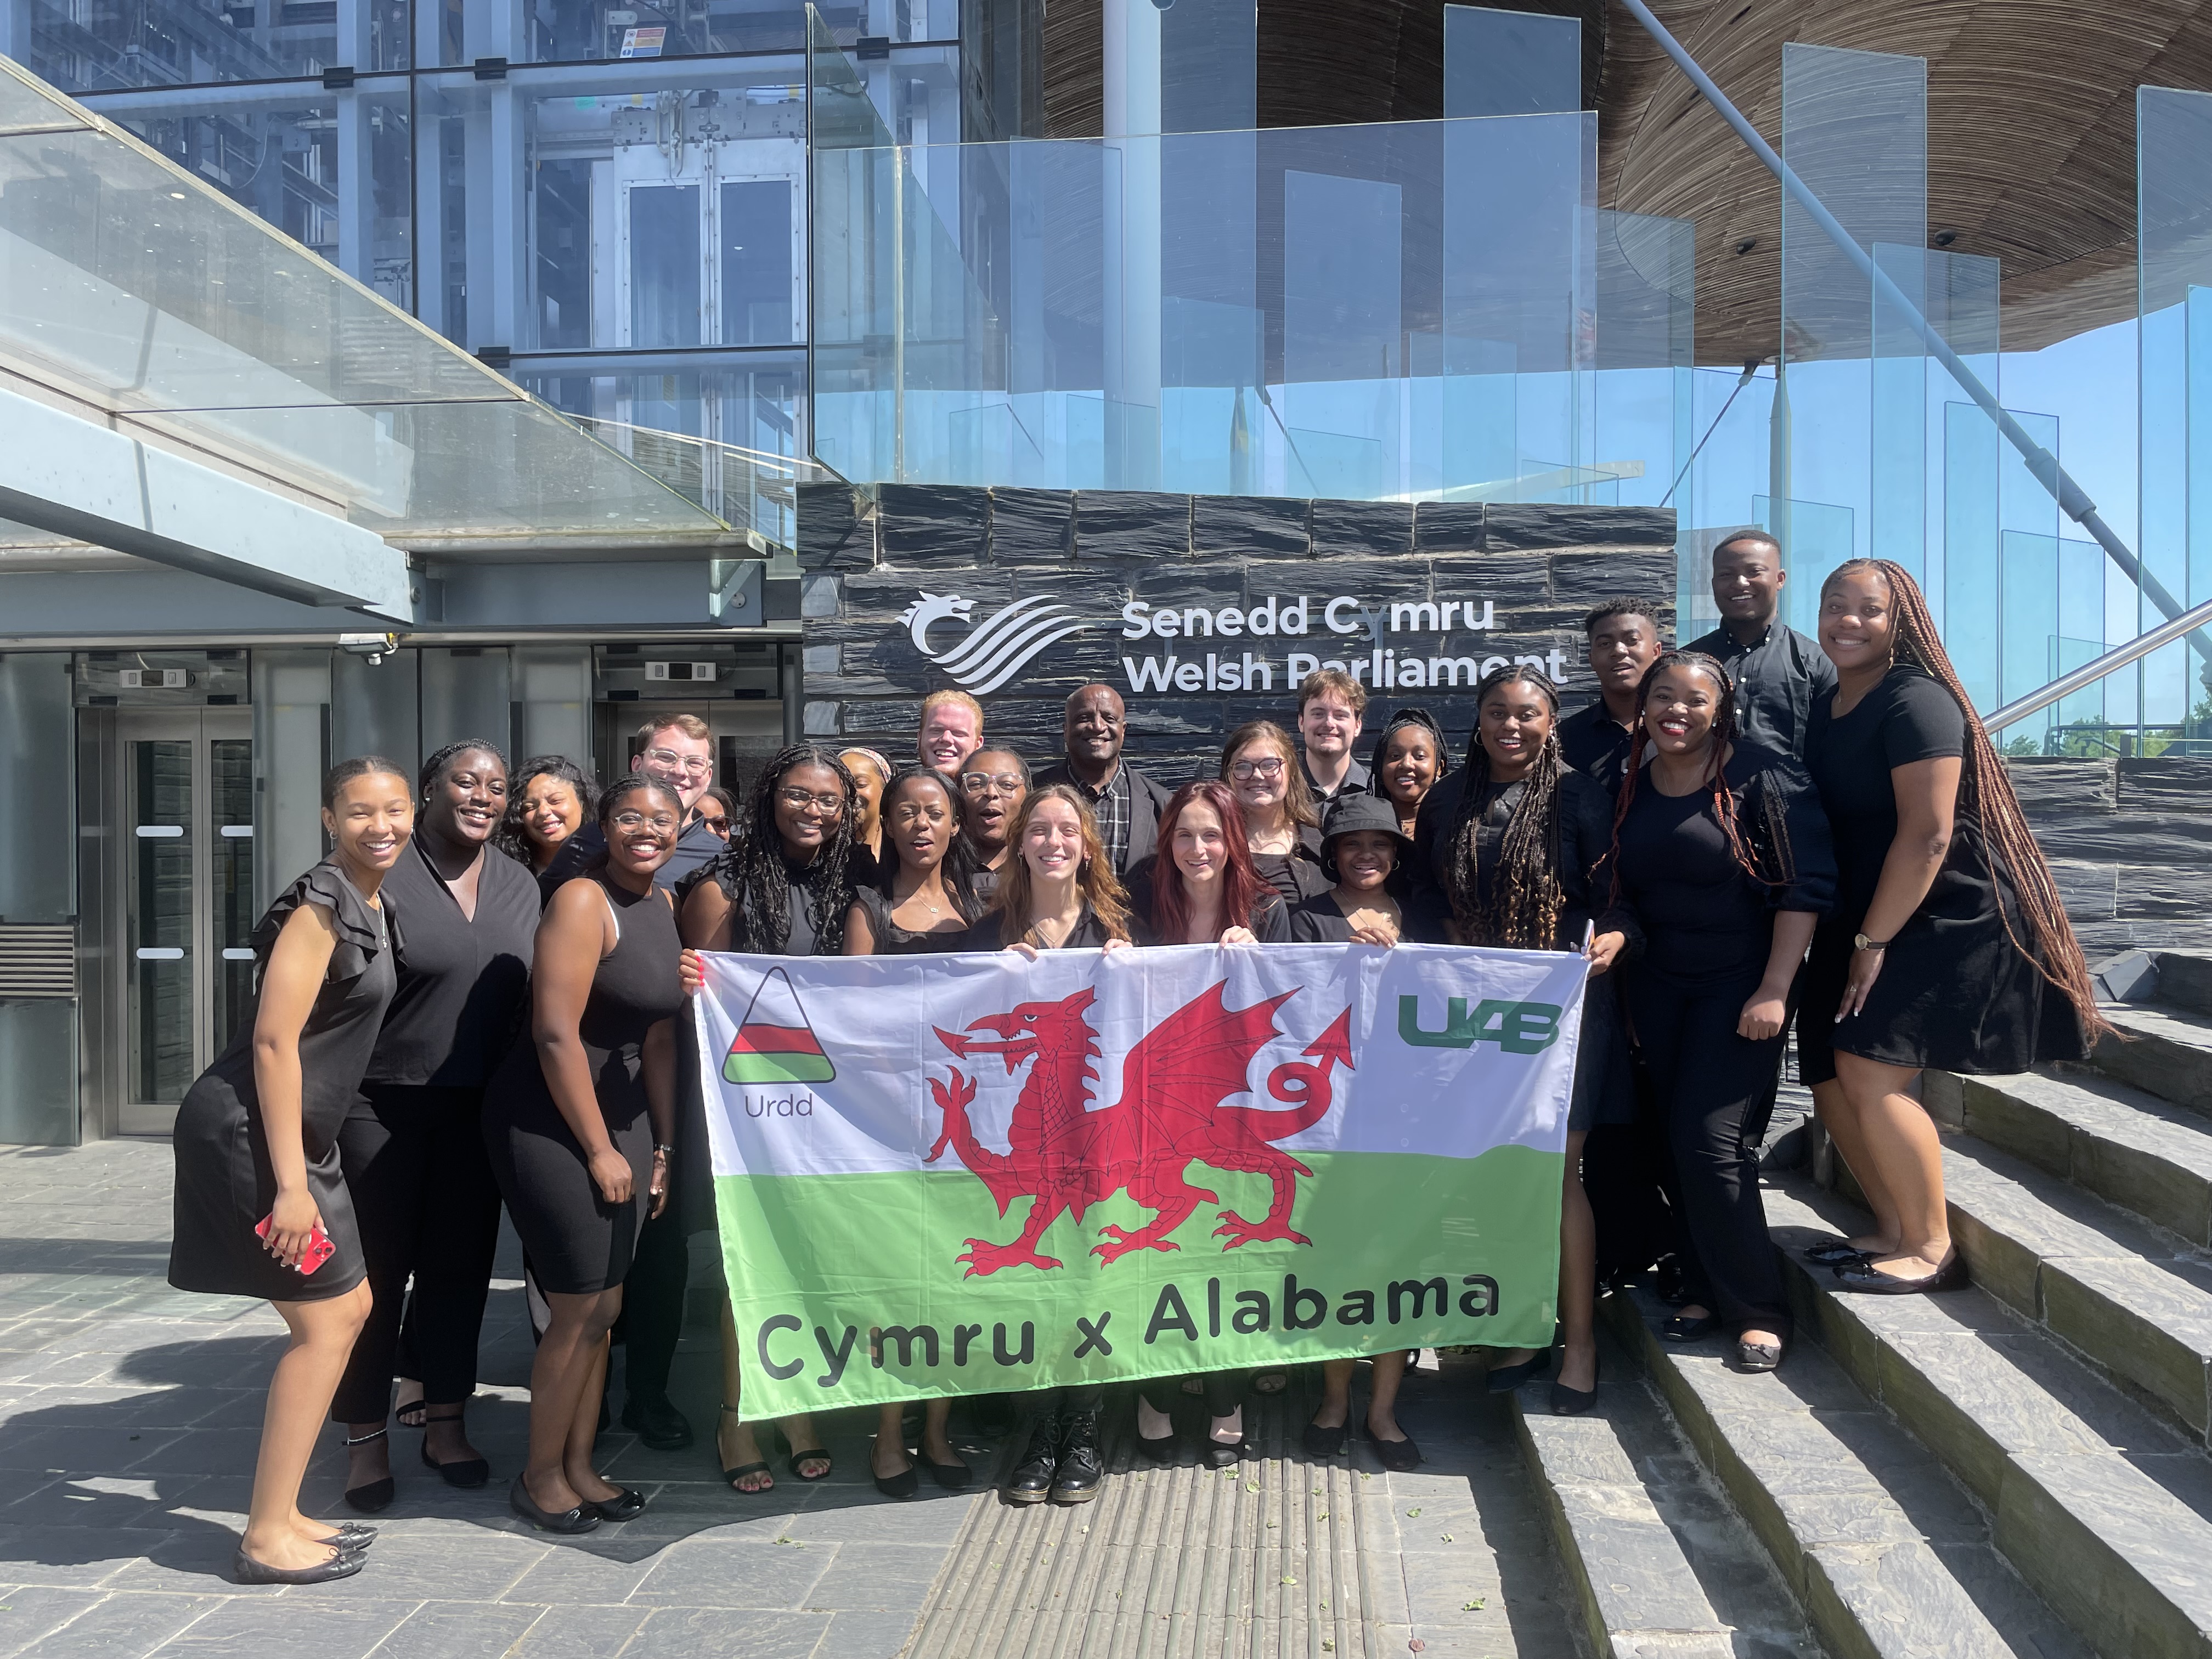 Click here to learn more about UAB Gospel Choir's visit to Wales in 2023!